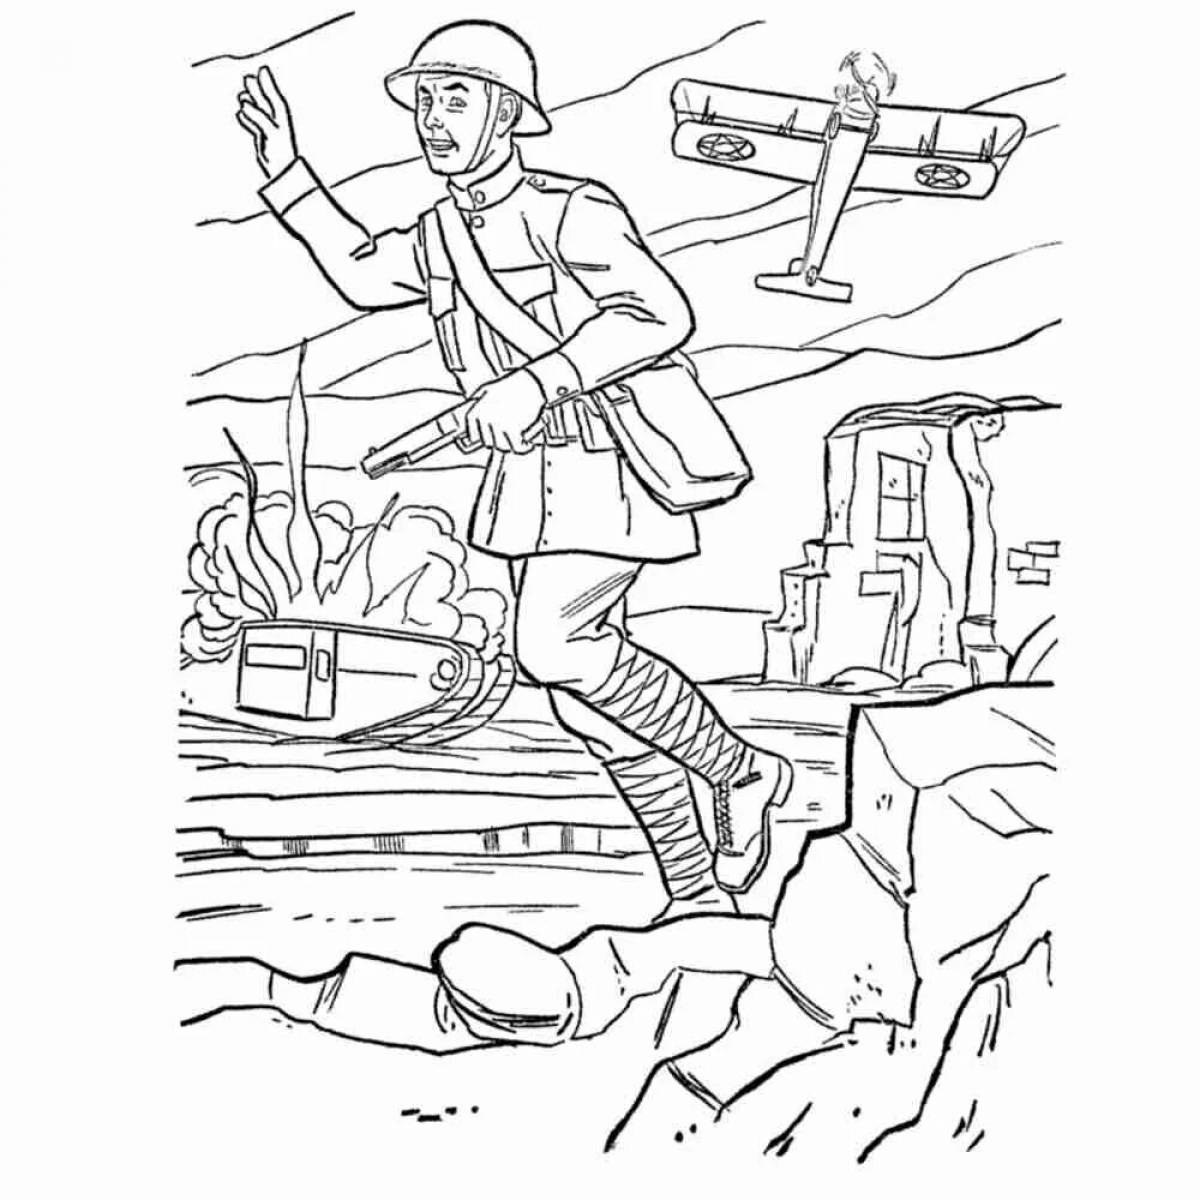 Coloring page dazzling military tankman